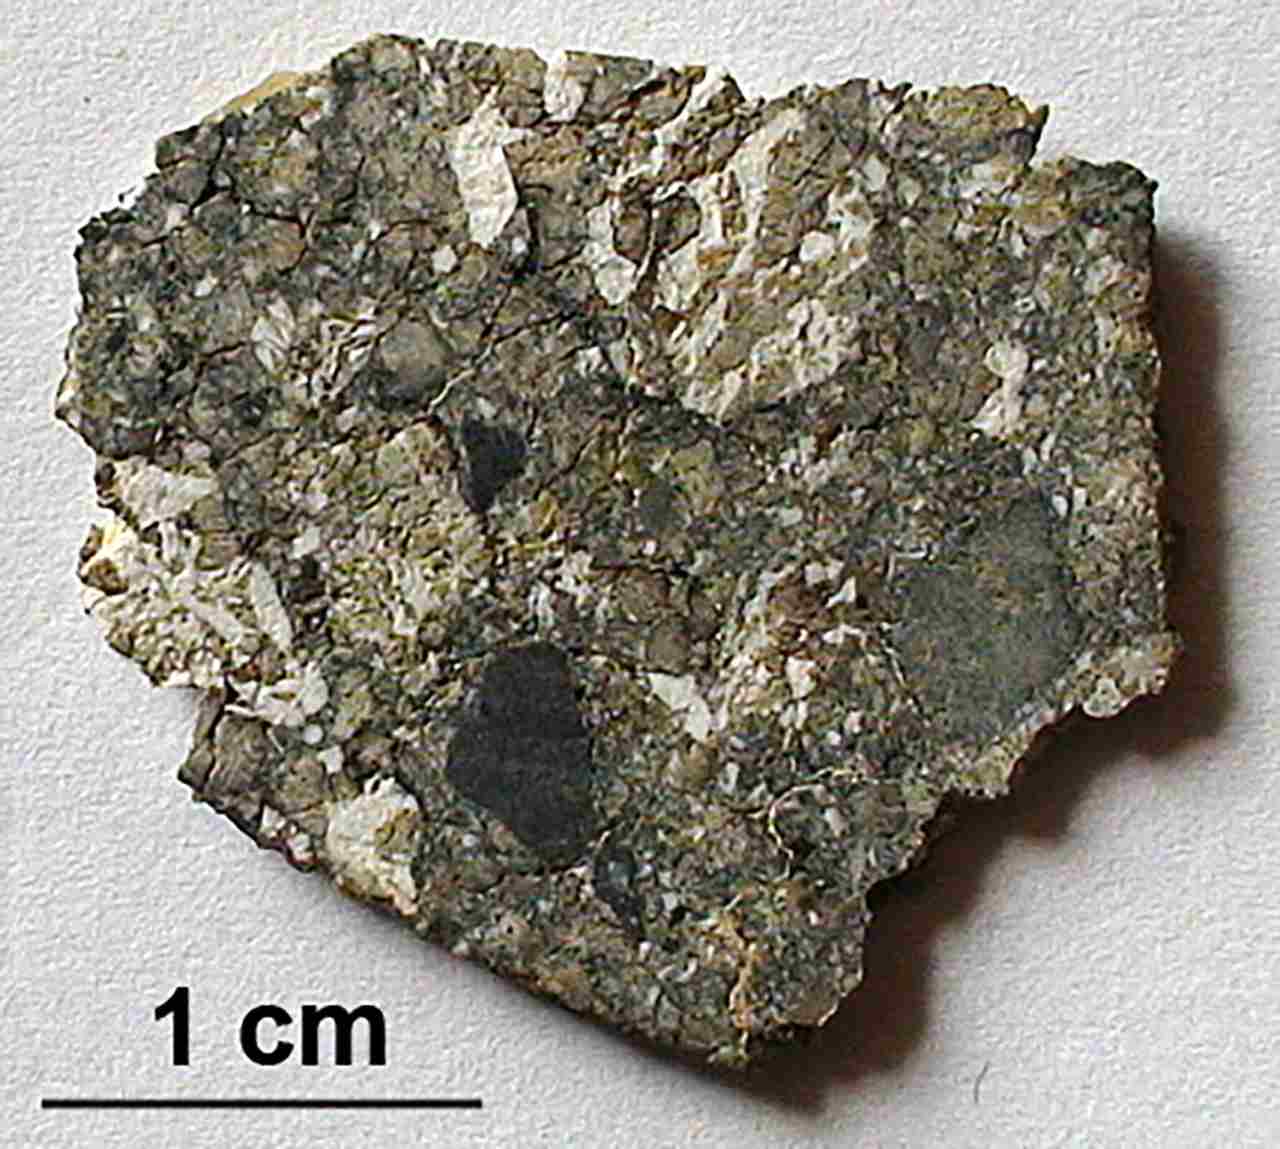  New mineral in Moon meteorite discovered by researchers, dubbed Downwilhelmsite